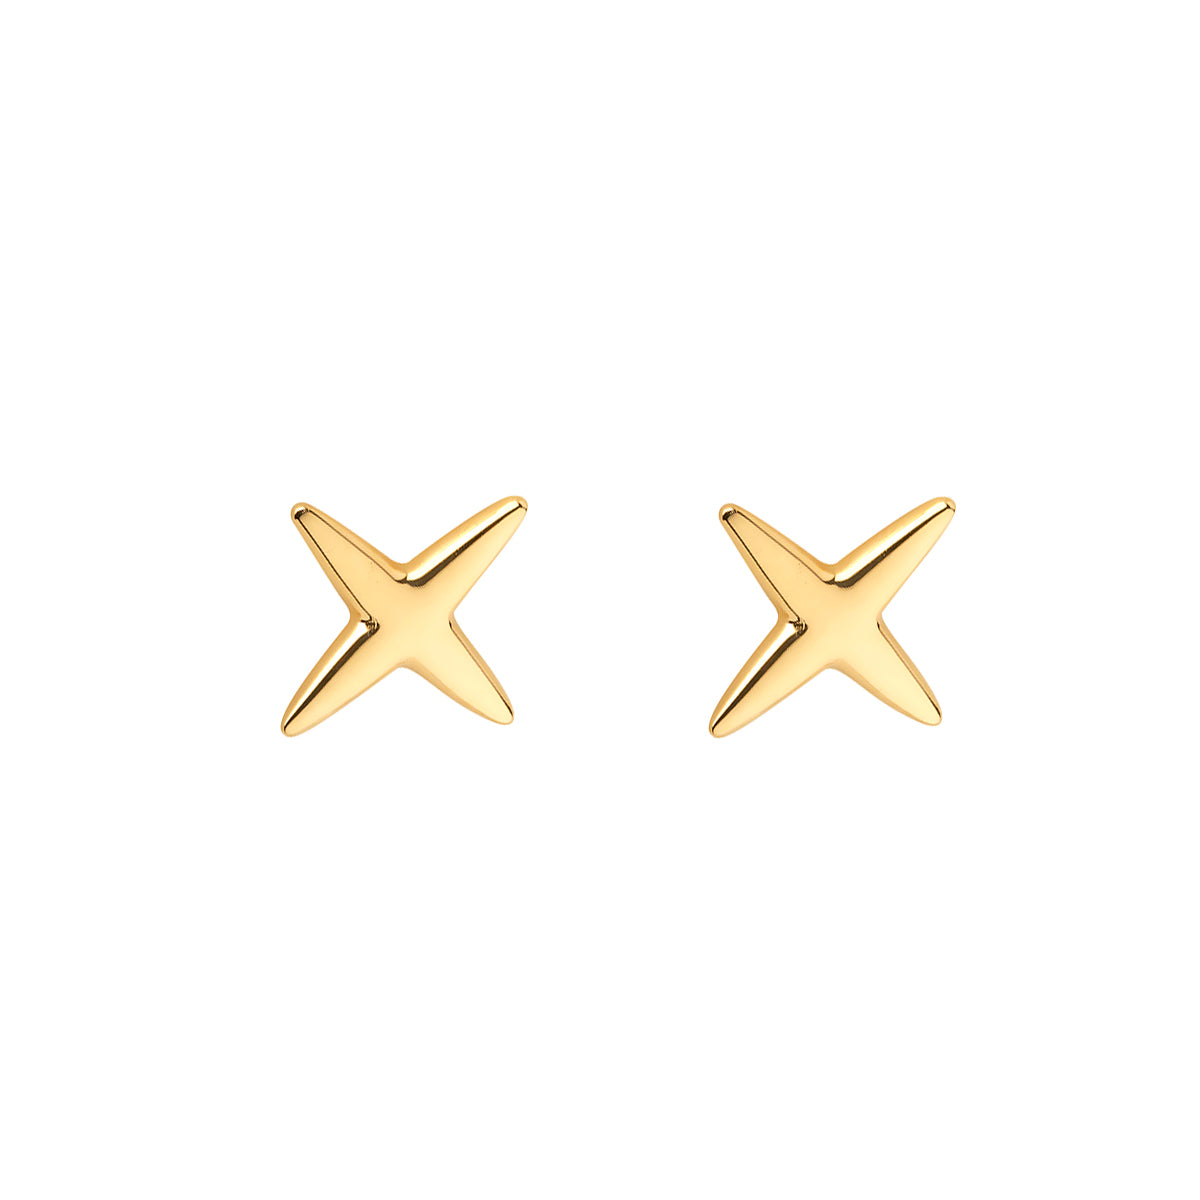 Ór Collection 9Ct Gold 'kiss' (X) Stud Earrings